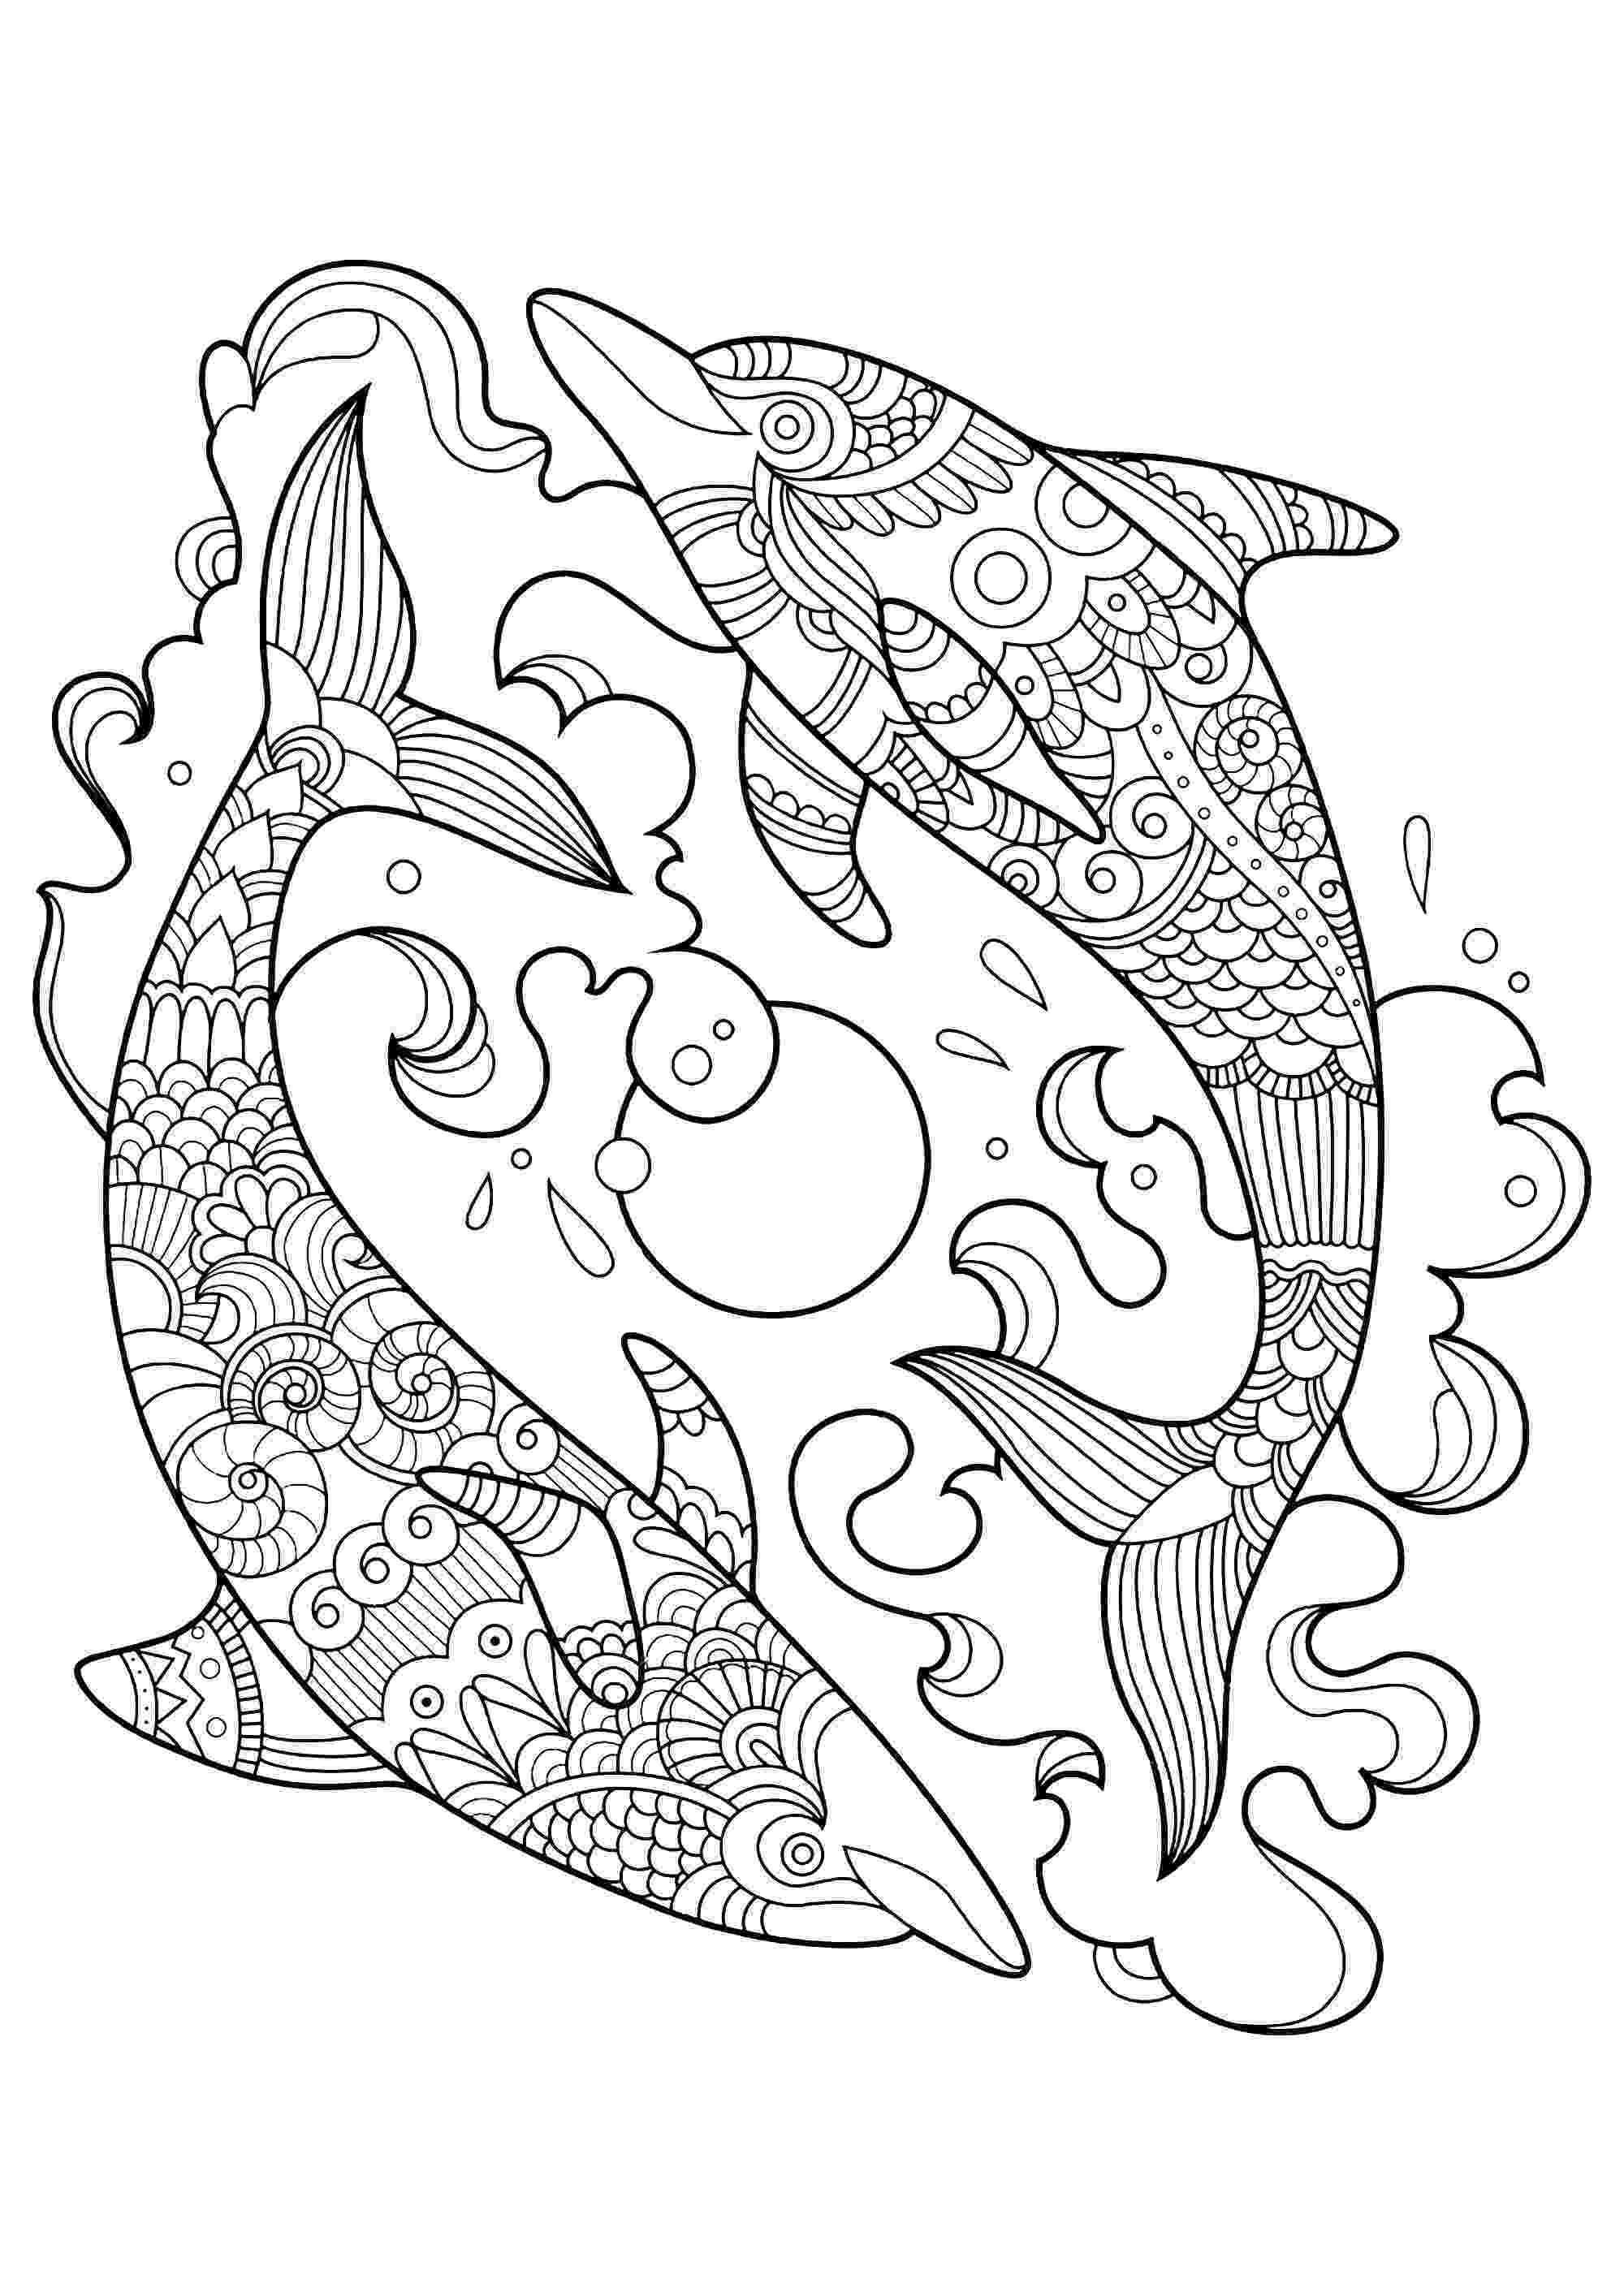 picture of dolphins to color dolphins to color for children dolphins kids coloring pages to dolphins picture color of 